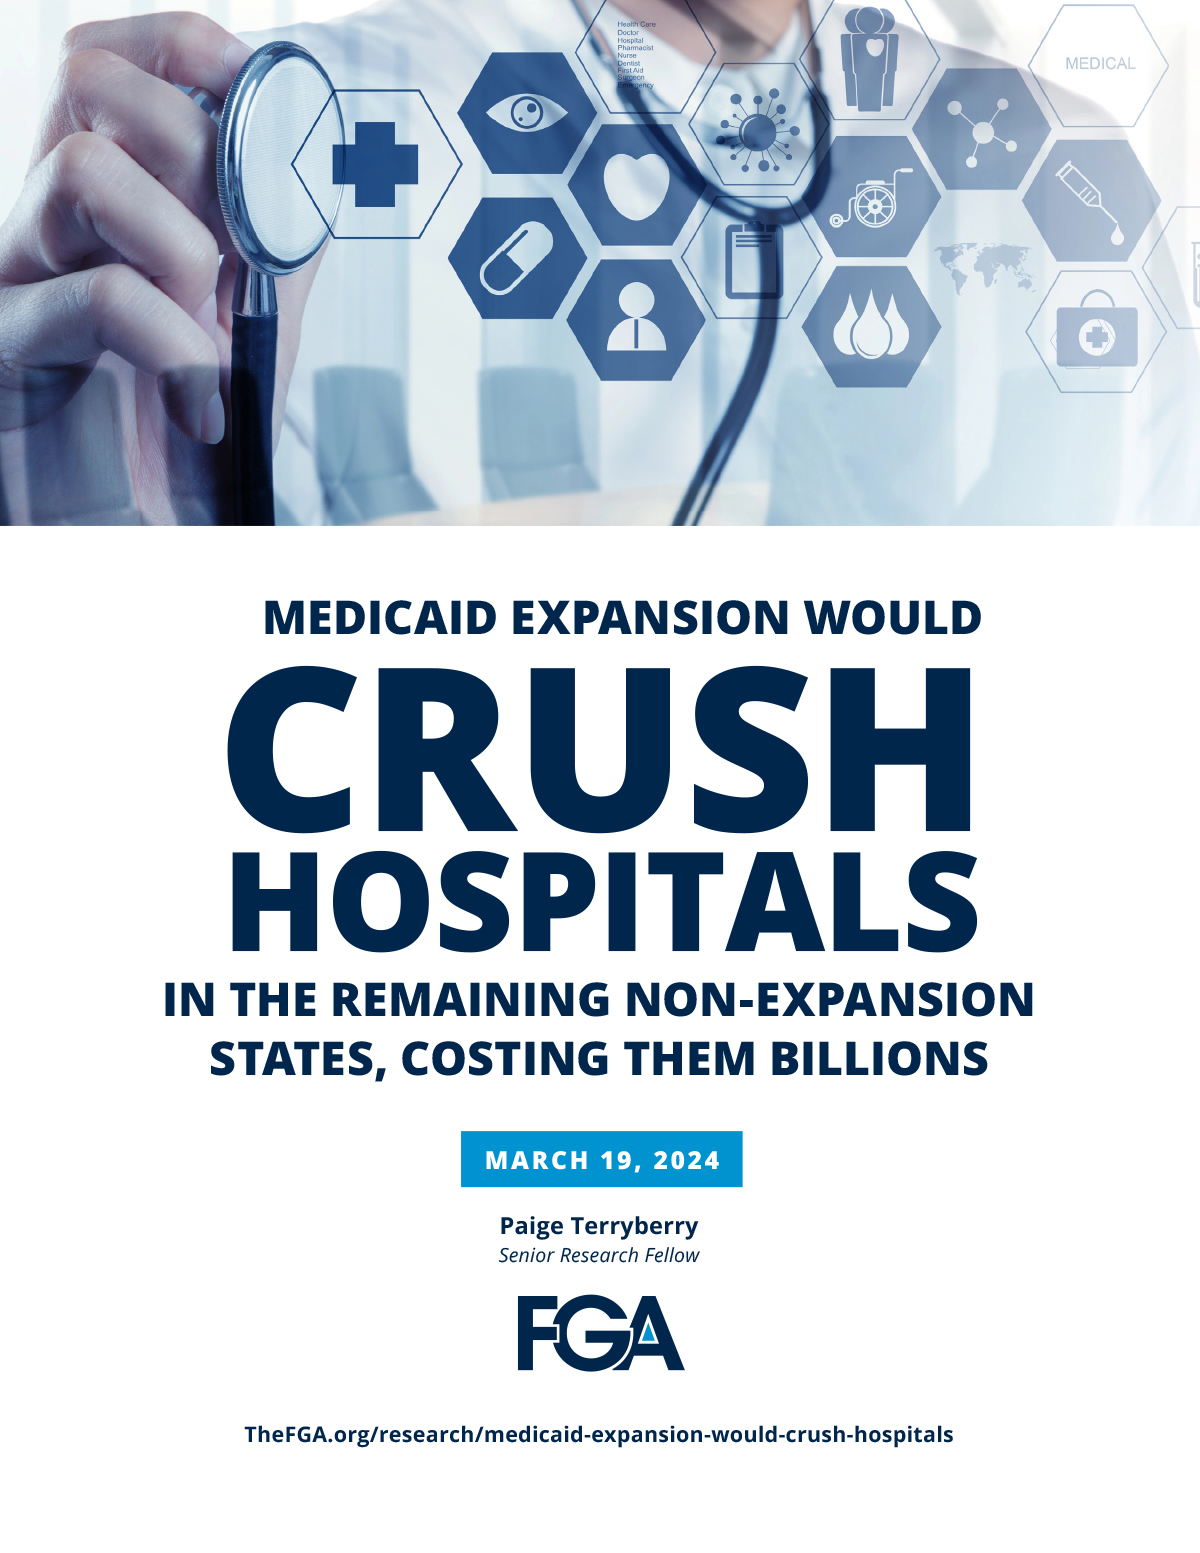 Medicaid Expansion Would Crush Hospitals in the Remaining Non-Expansion States, Costing Them Billions